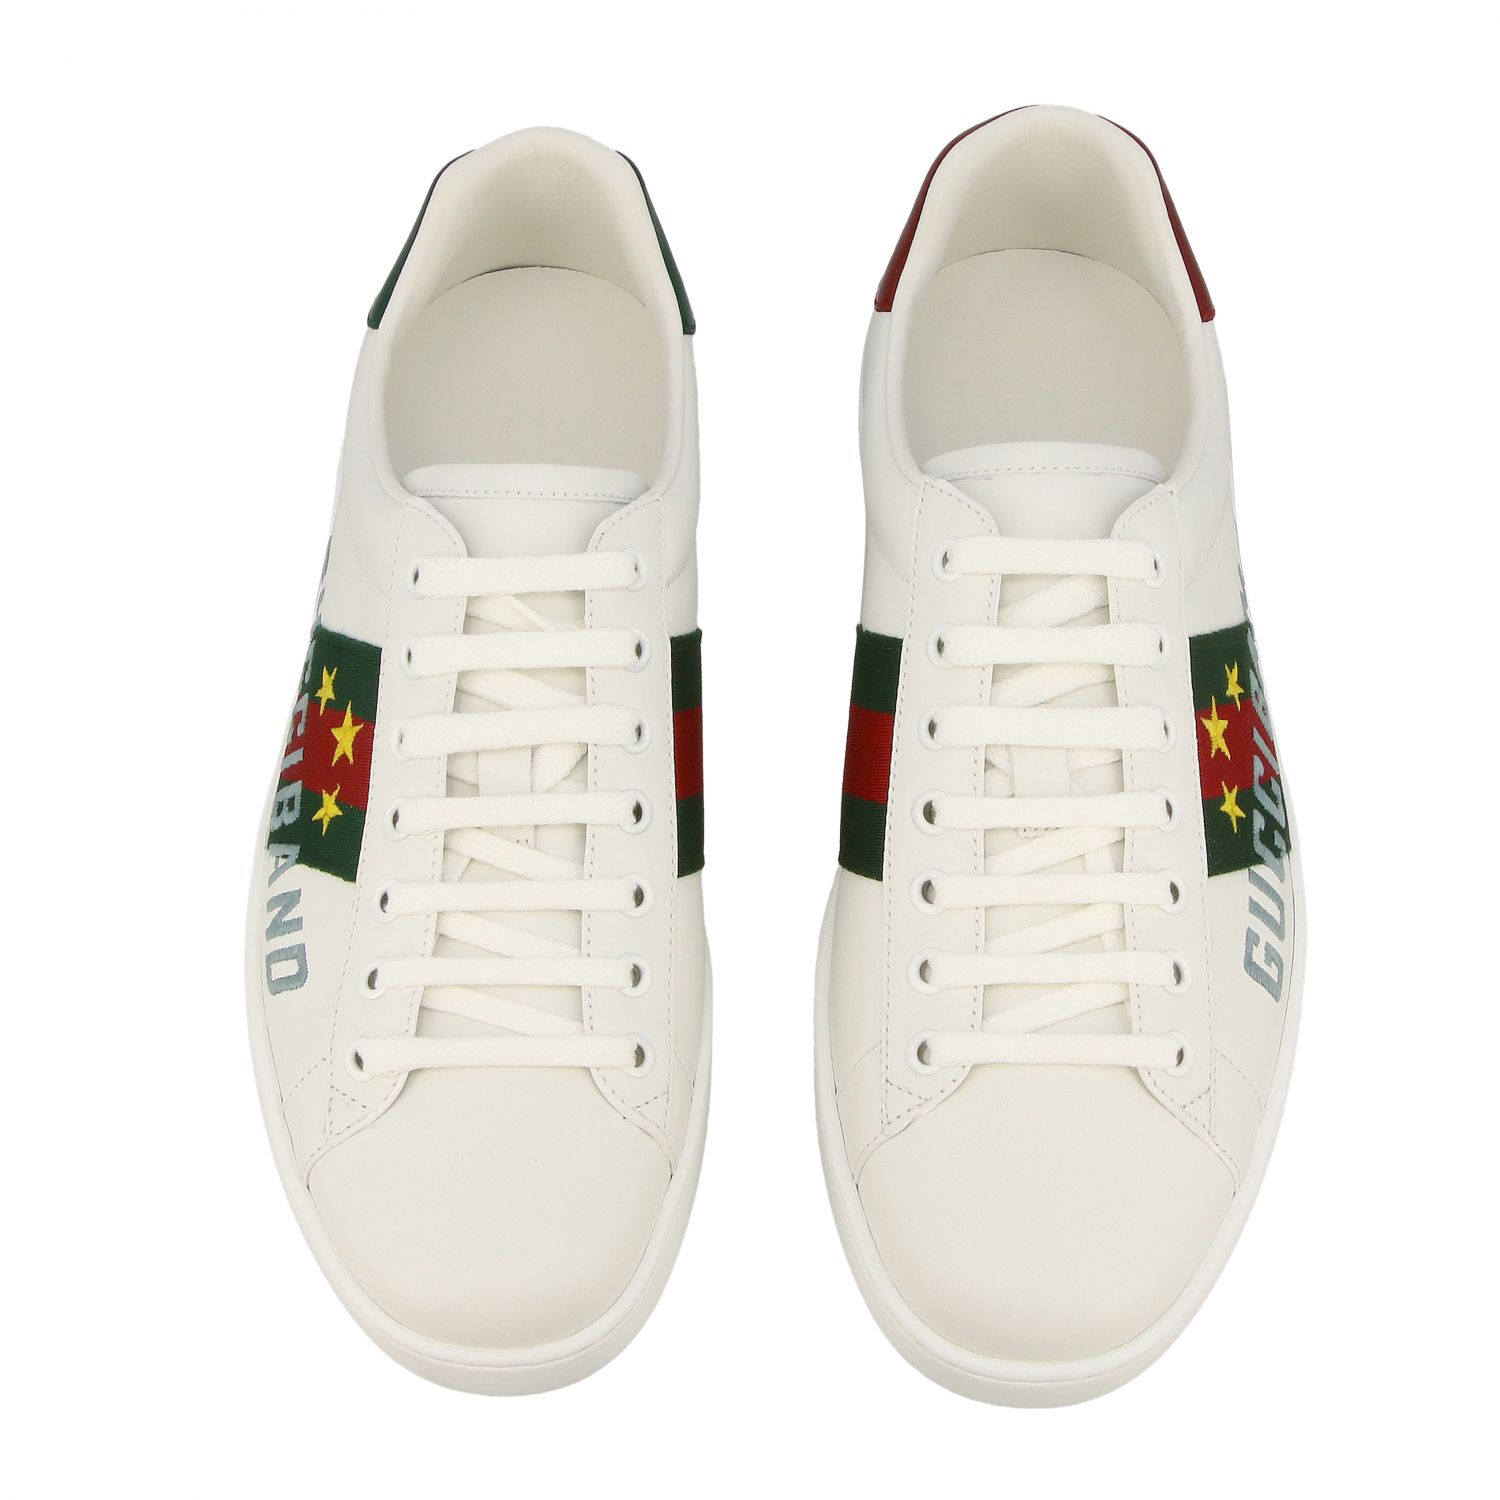 GUCCI: New Ace leather sneakers with Web bands and band logo | Sneakers ...